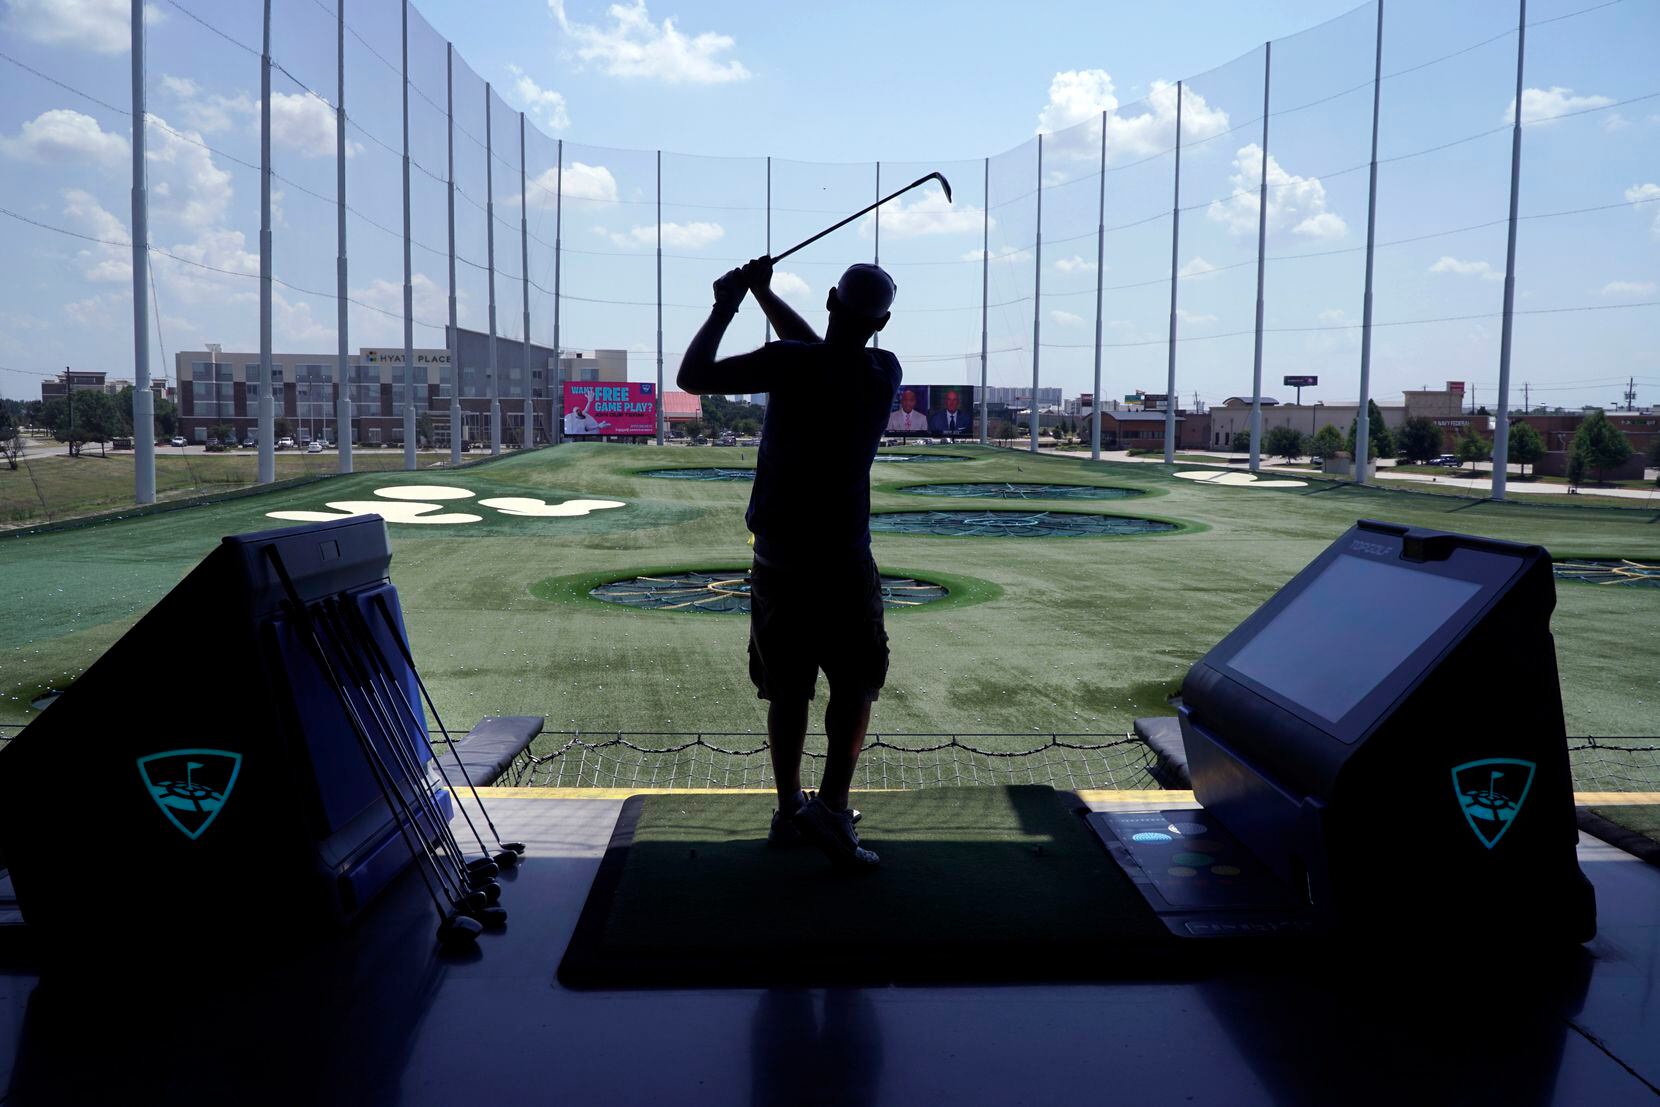 Jared Tiner practices his swing at Topgolf in The Colony on June 29, 2022.